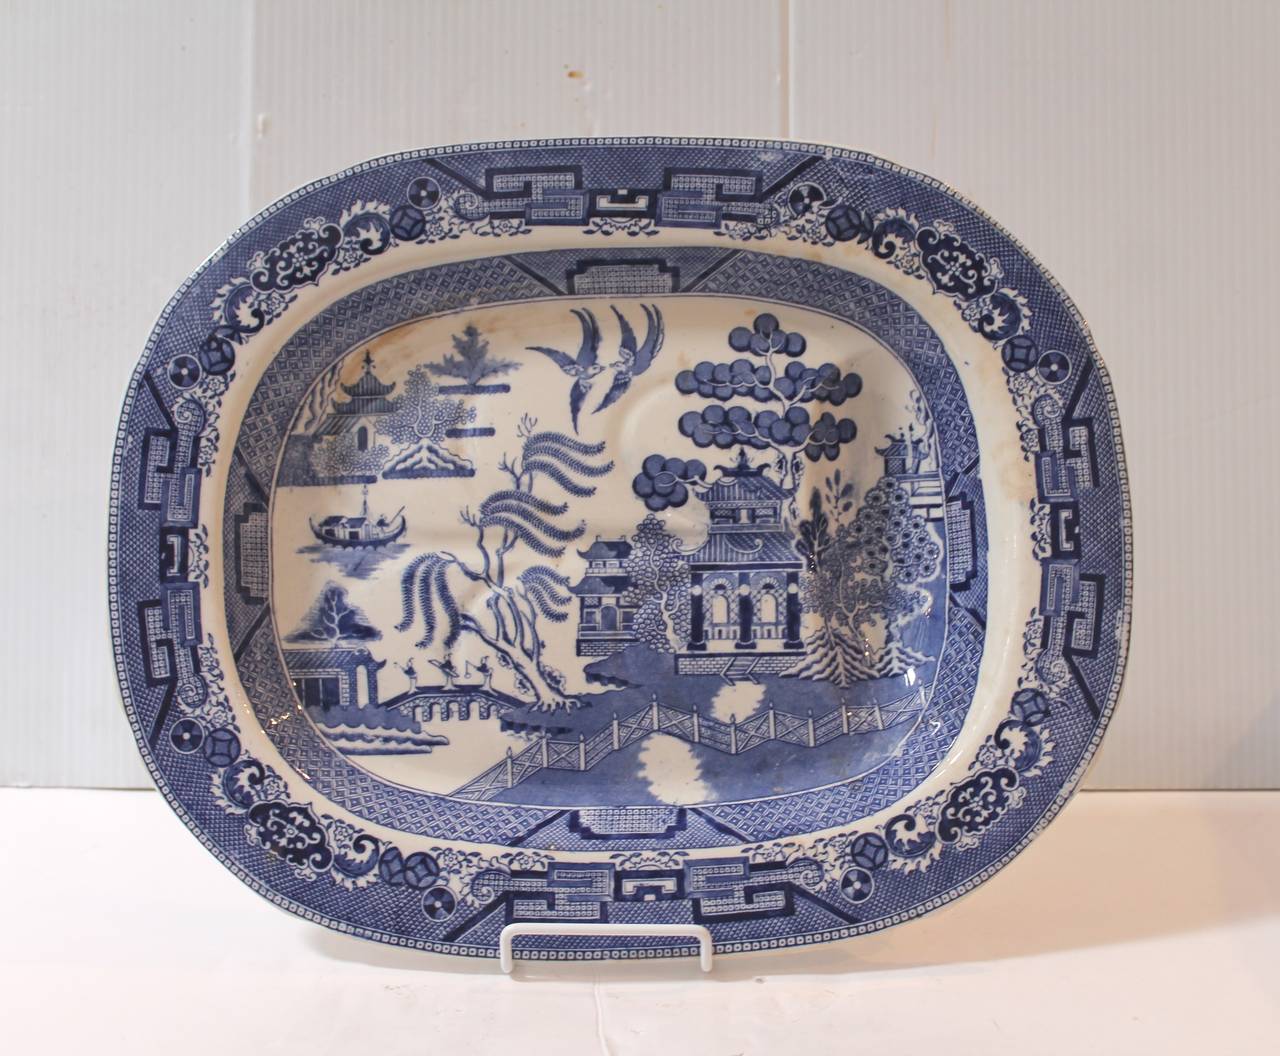 This is quite unusual to find the blue willow serving meat platter with a indent drain for the meat juice. This early 19th century blue willow ironstone platter is in great condition. This is stamped Ridgeway, England.